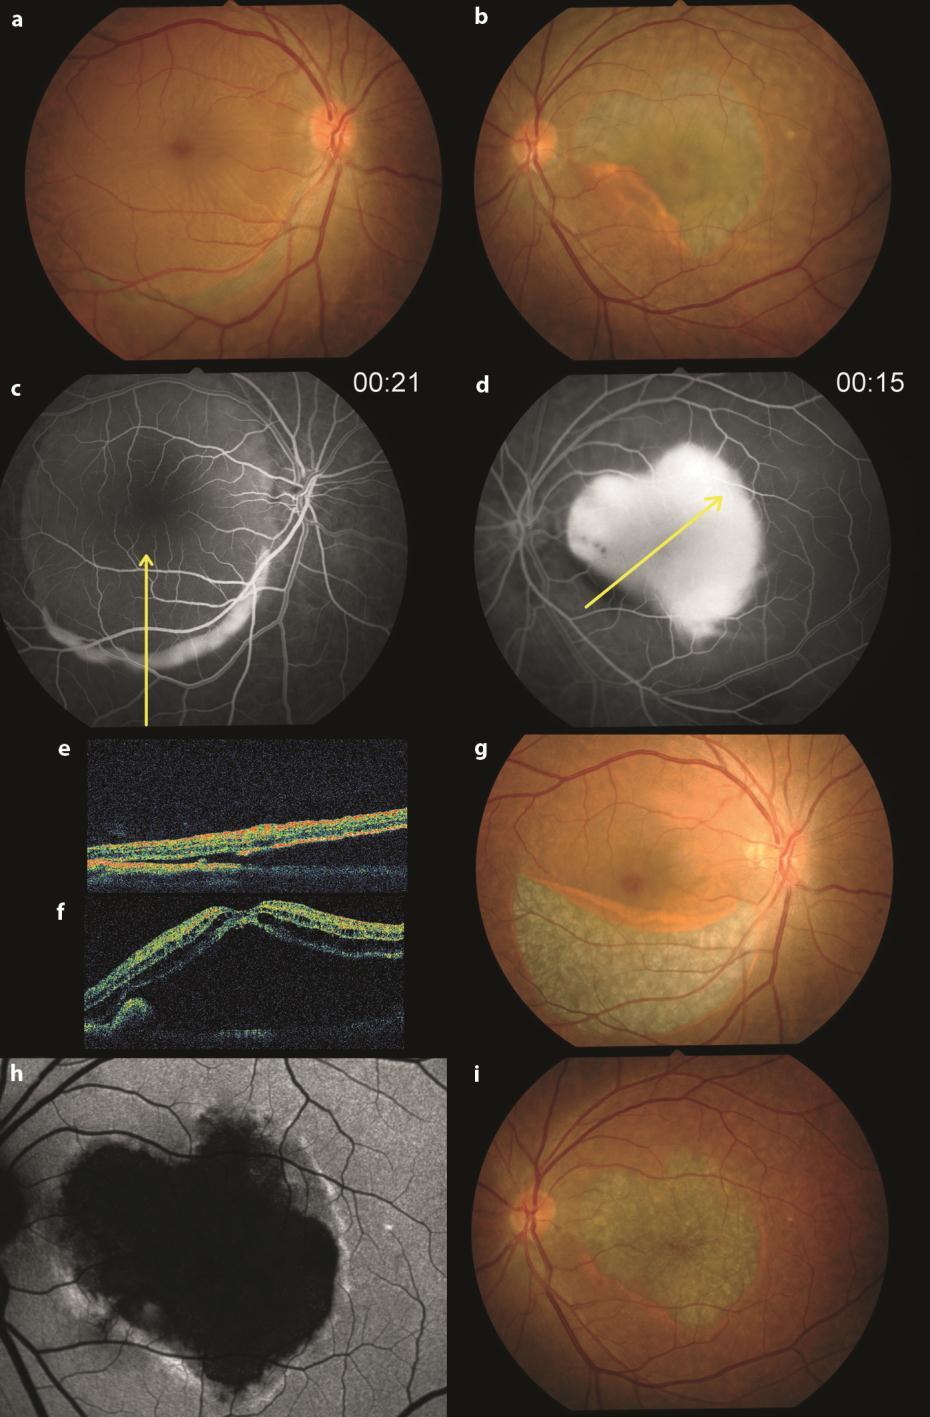 354 Fig. 2. Case 2. a, b Fundus photography illustrates serous RPE detachment and RPE tear in both eyes.